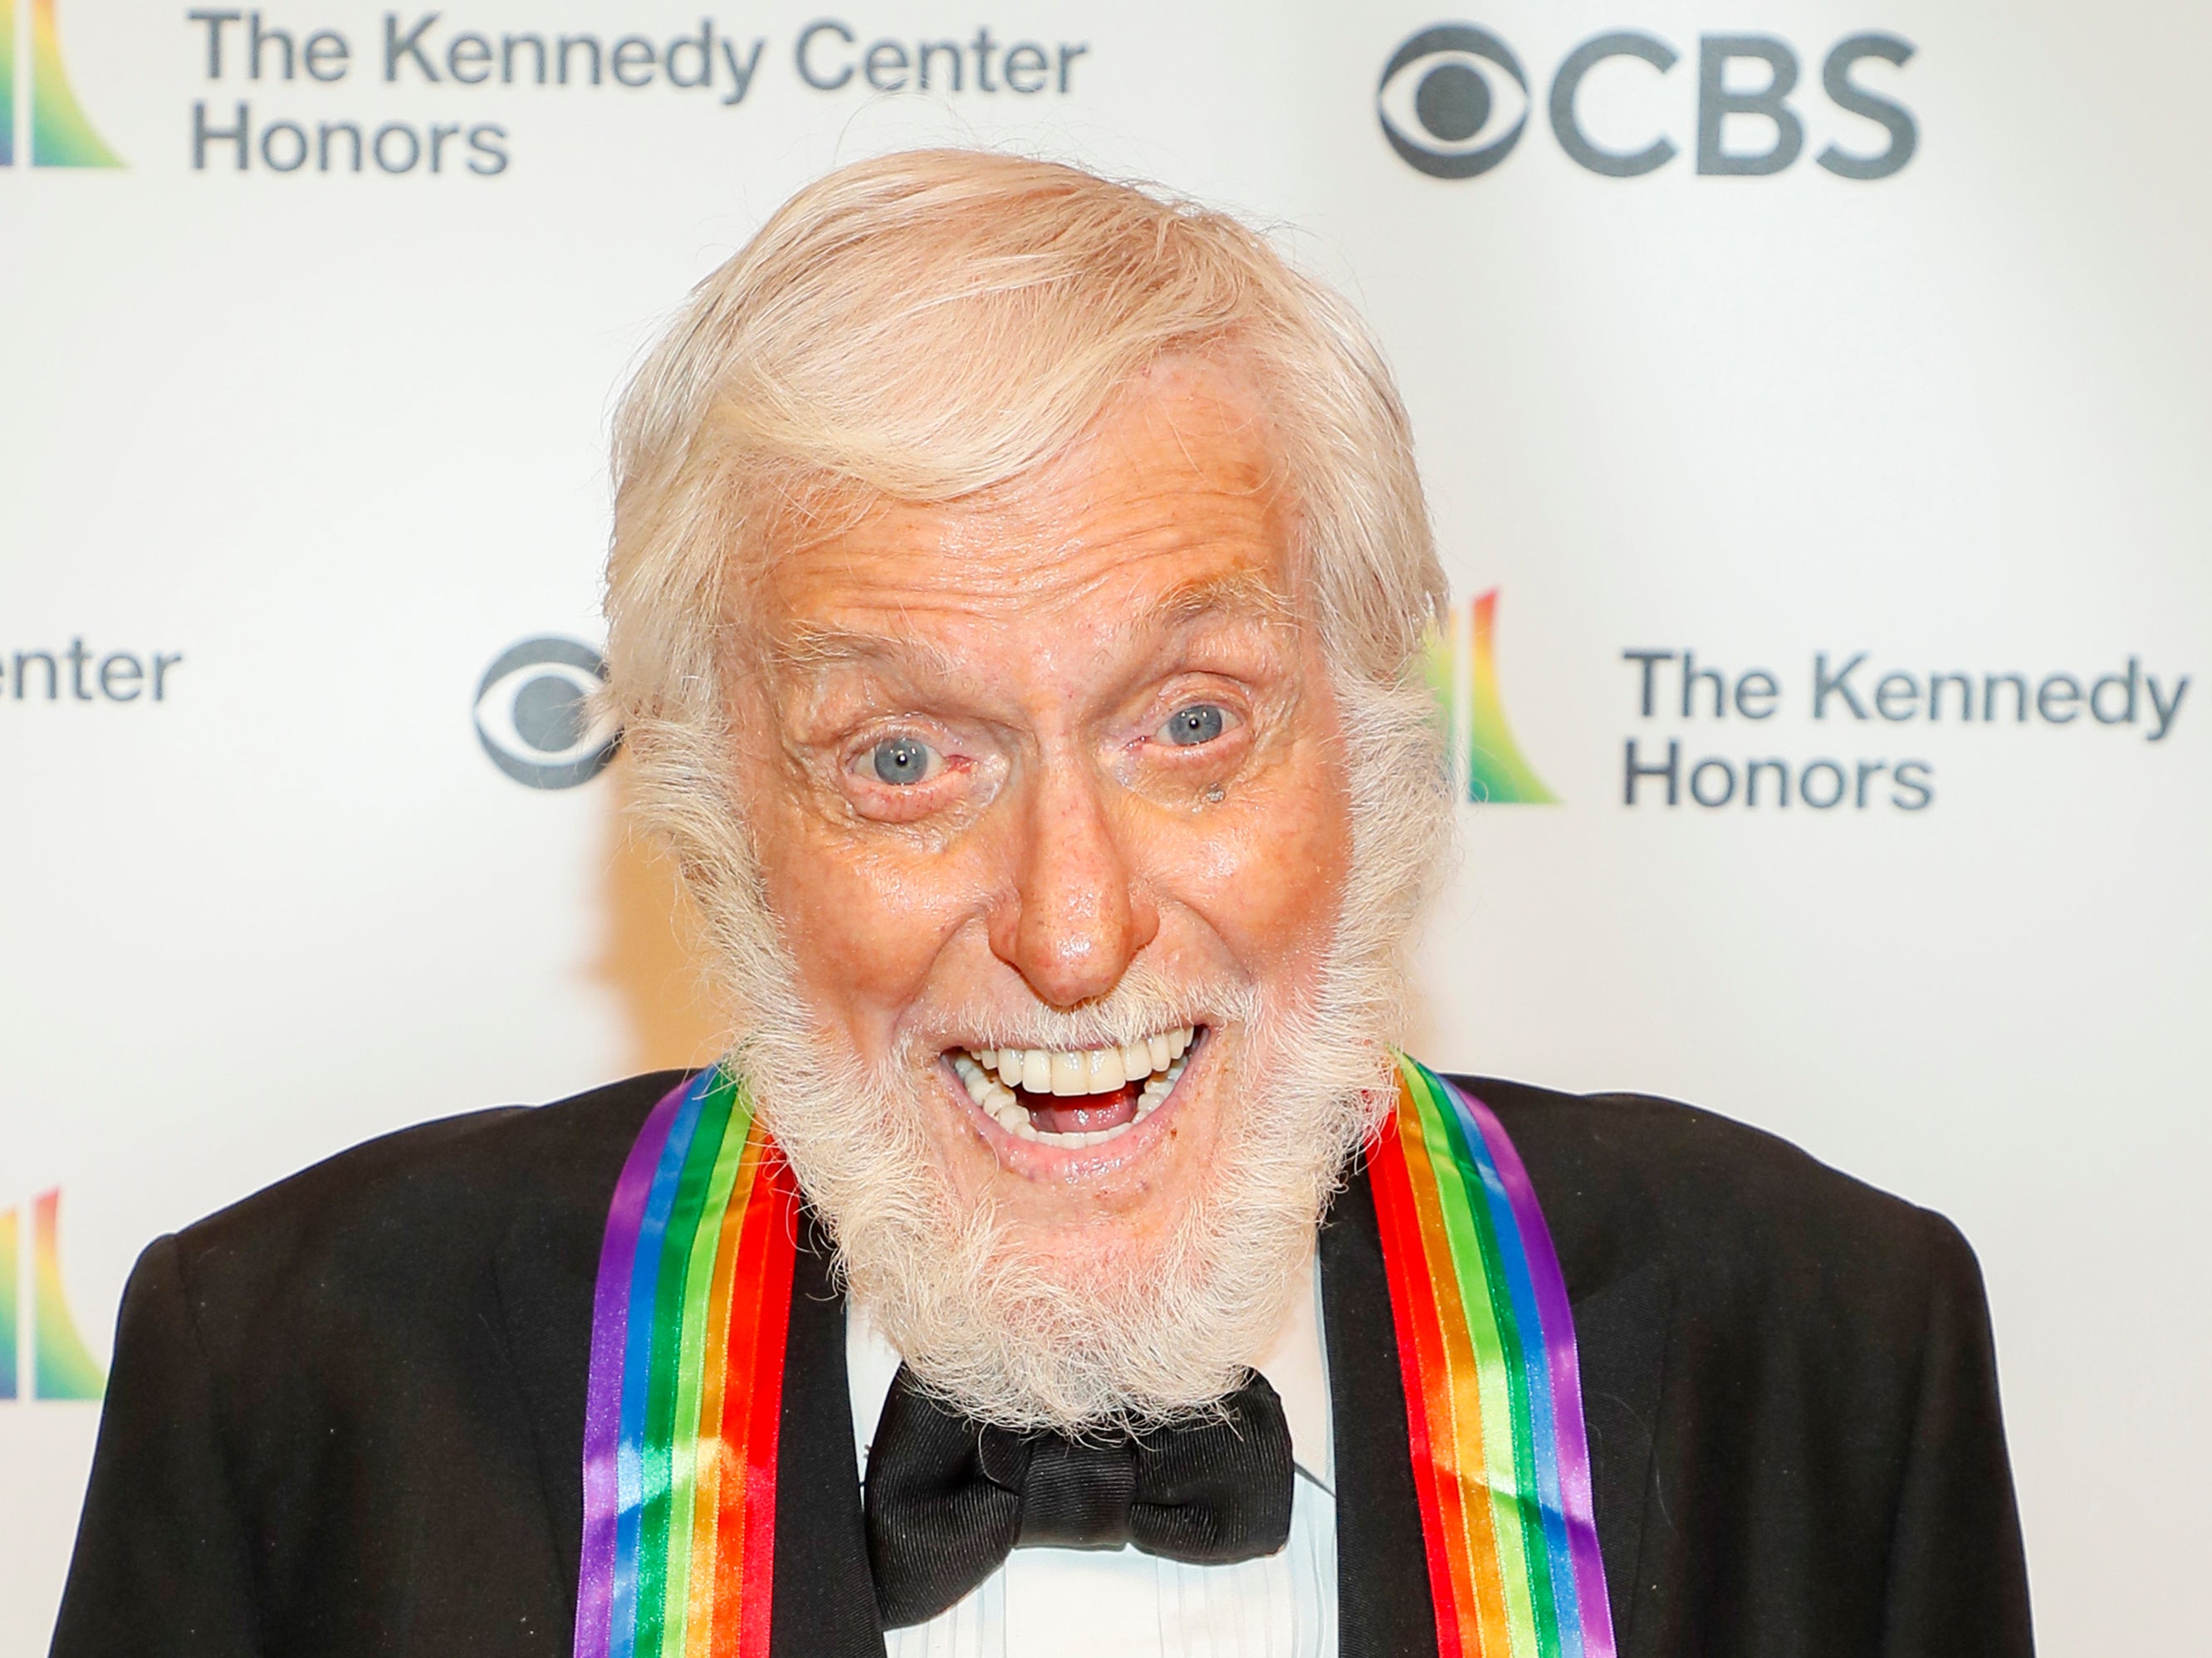 Dick Van Dyke attends the 43rd Annual Kennedy Center Honors at The Kennedy Center on 21 May 2021